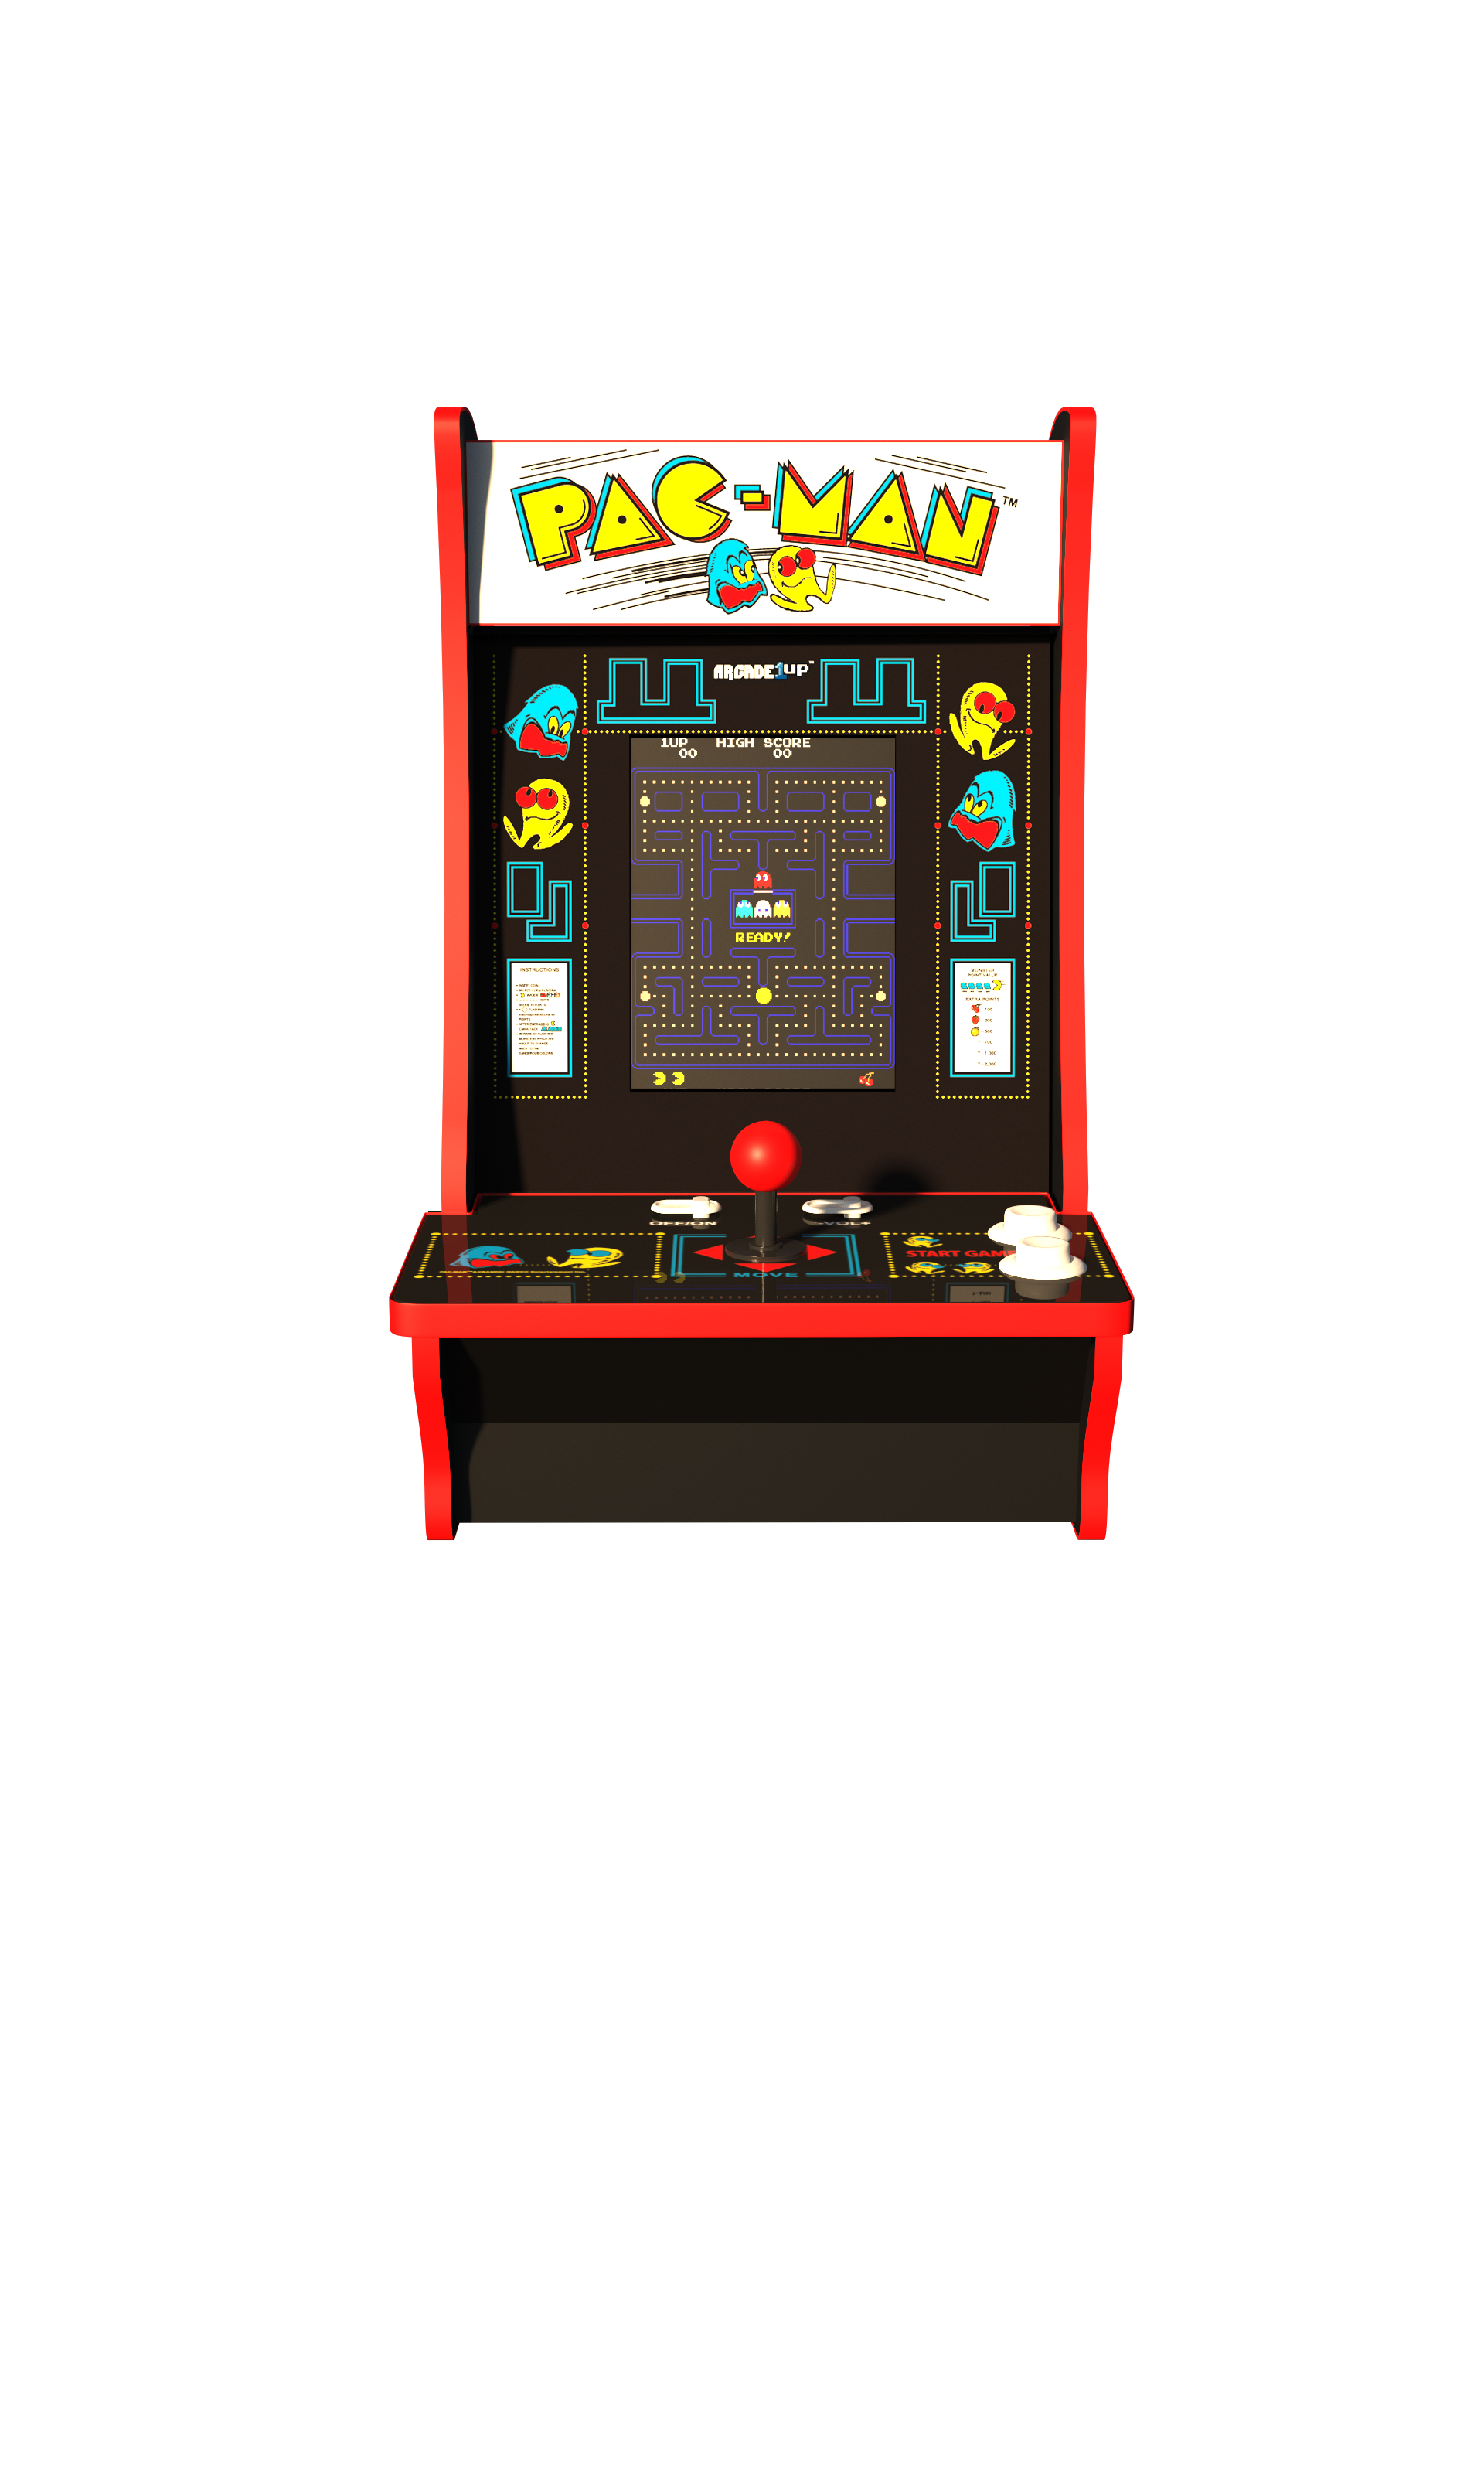 Pac-Man and Pac & Pal Counter Arcade Machine, Arcade1UP - image 4 of 10